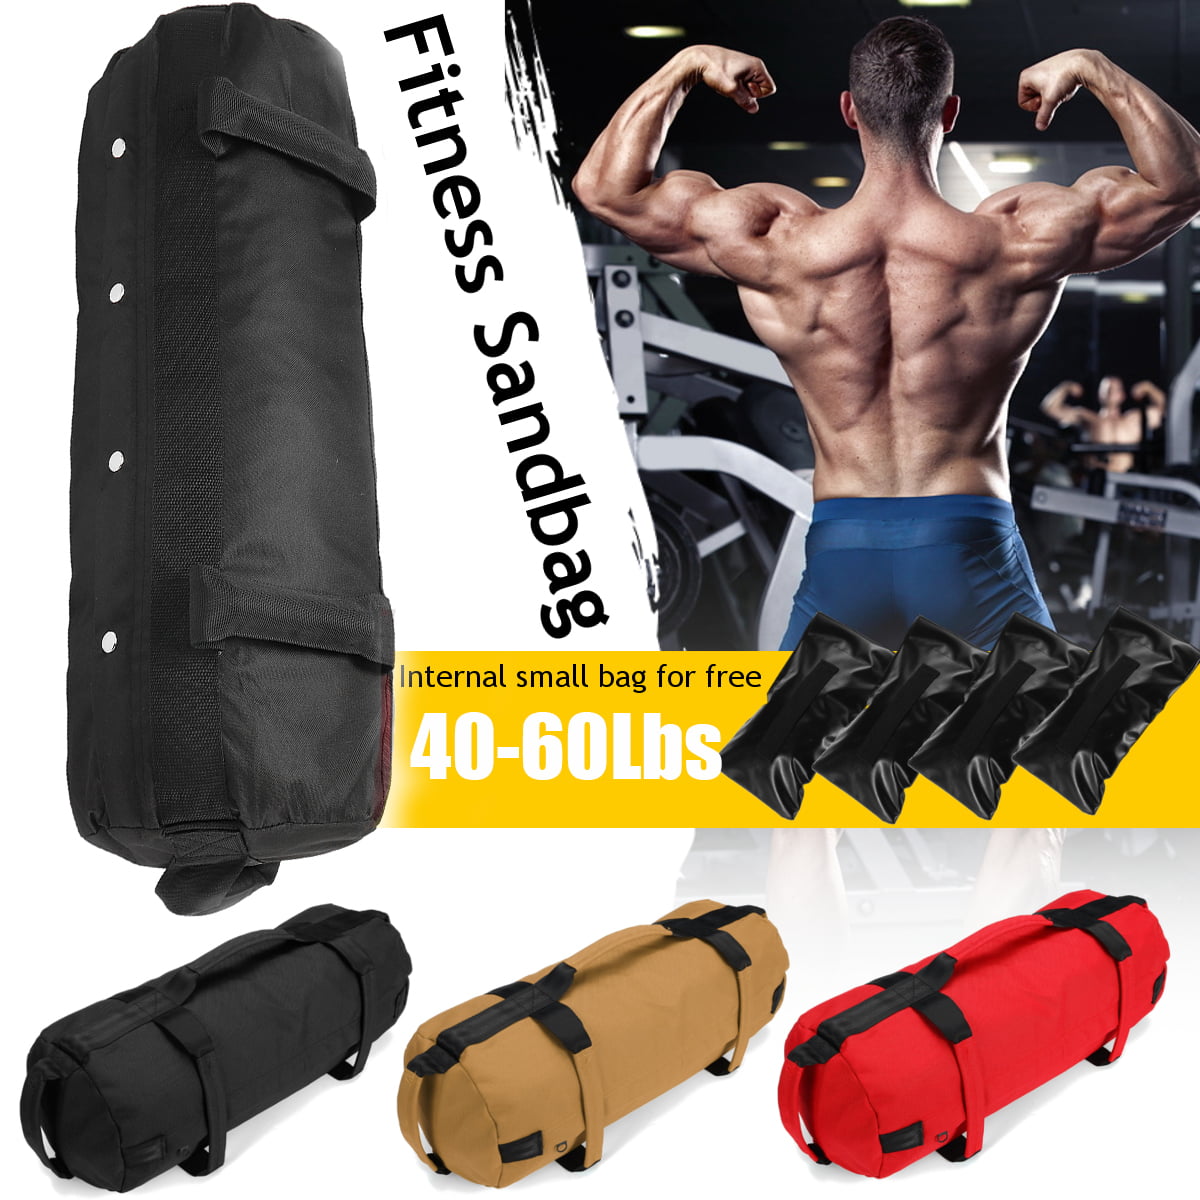 Weight Lifting Exercise 15kg/20kg/25kg fdsad Power Bags Weight Training Power Bag With Handle Sandbag Weight Training Bag Heavy Duty Workout Sandbag Fitness Exercise Equipment For Strength Training